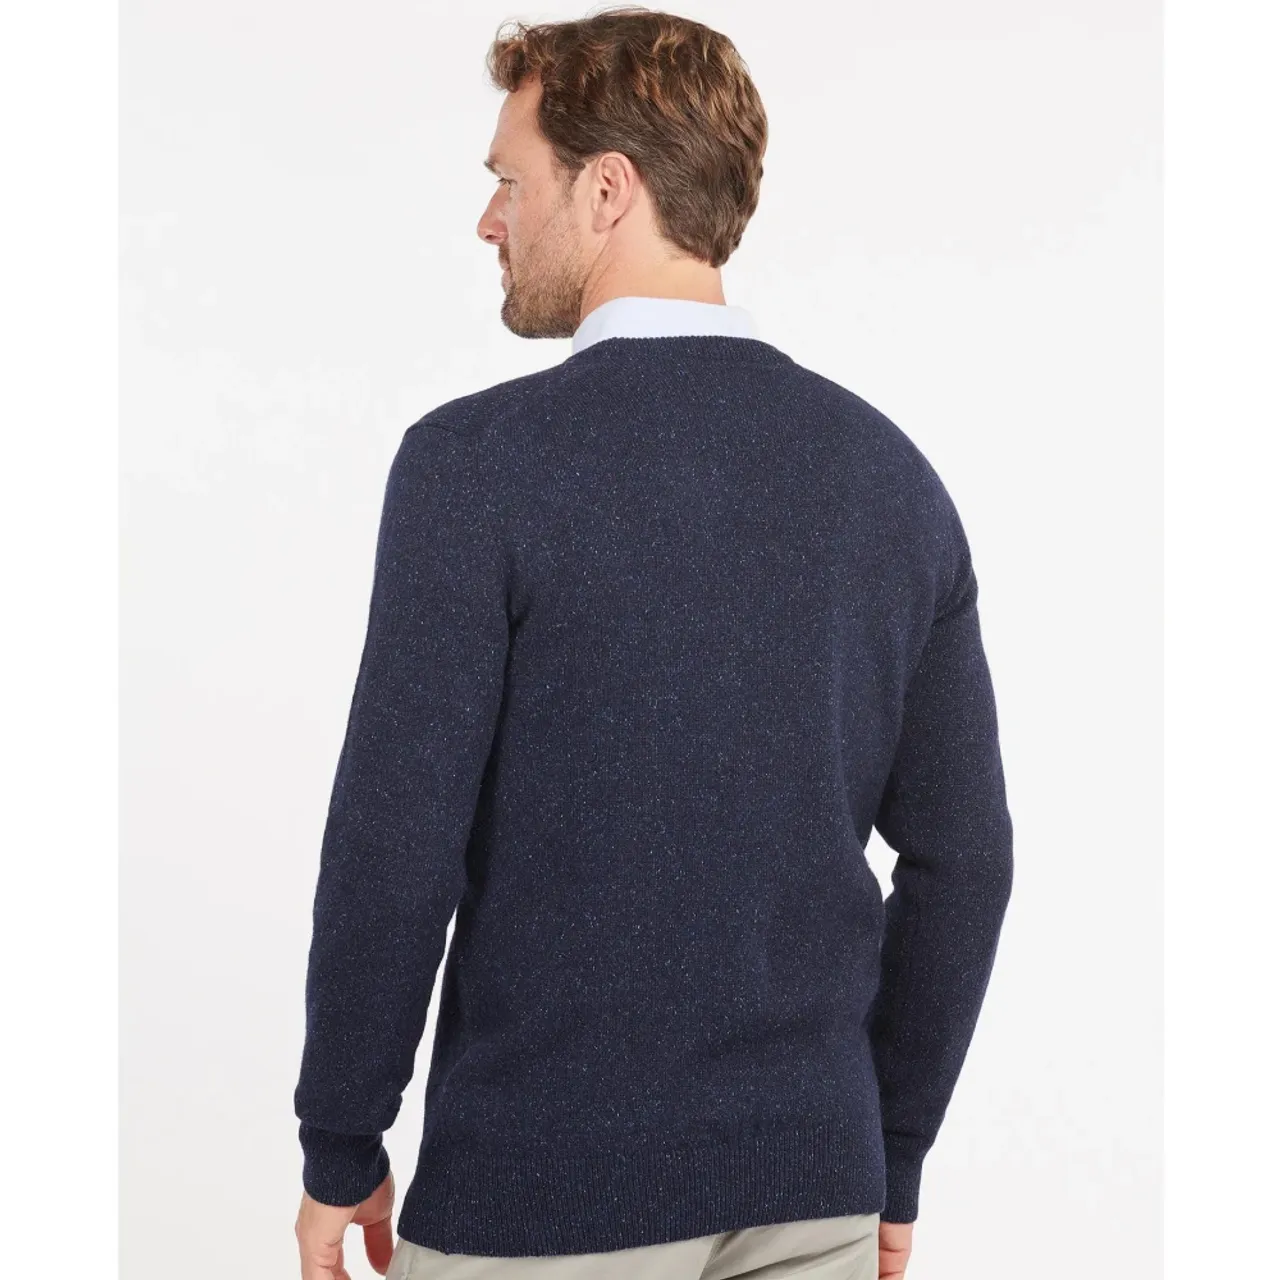 Barbour , Chunky Knit Wool Sweater in Navy ,Blue male, Sizes: